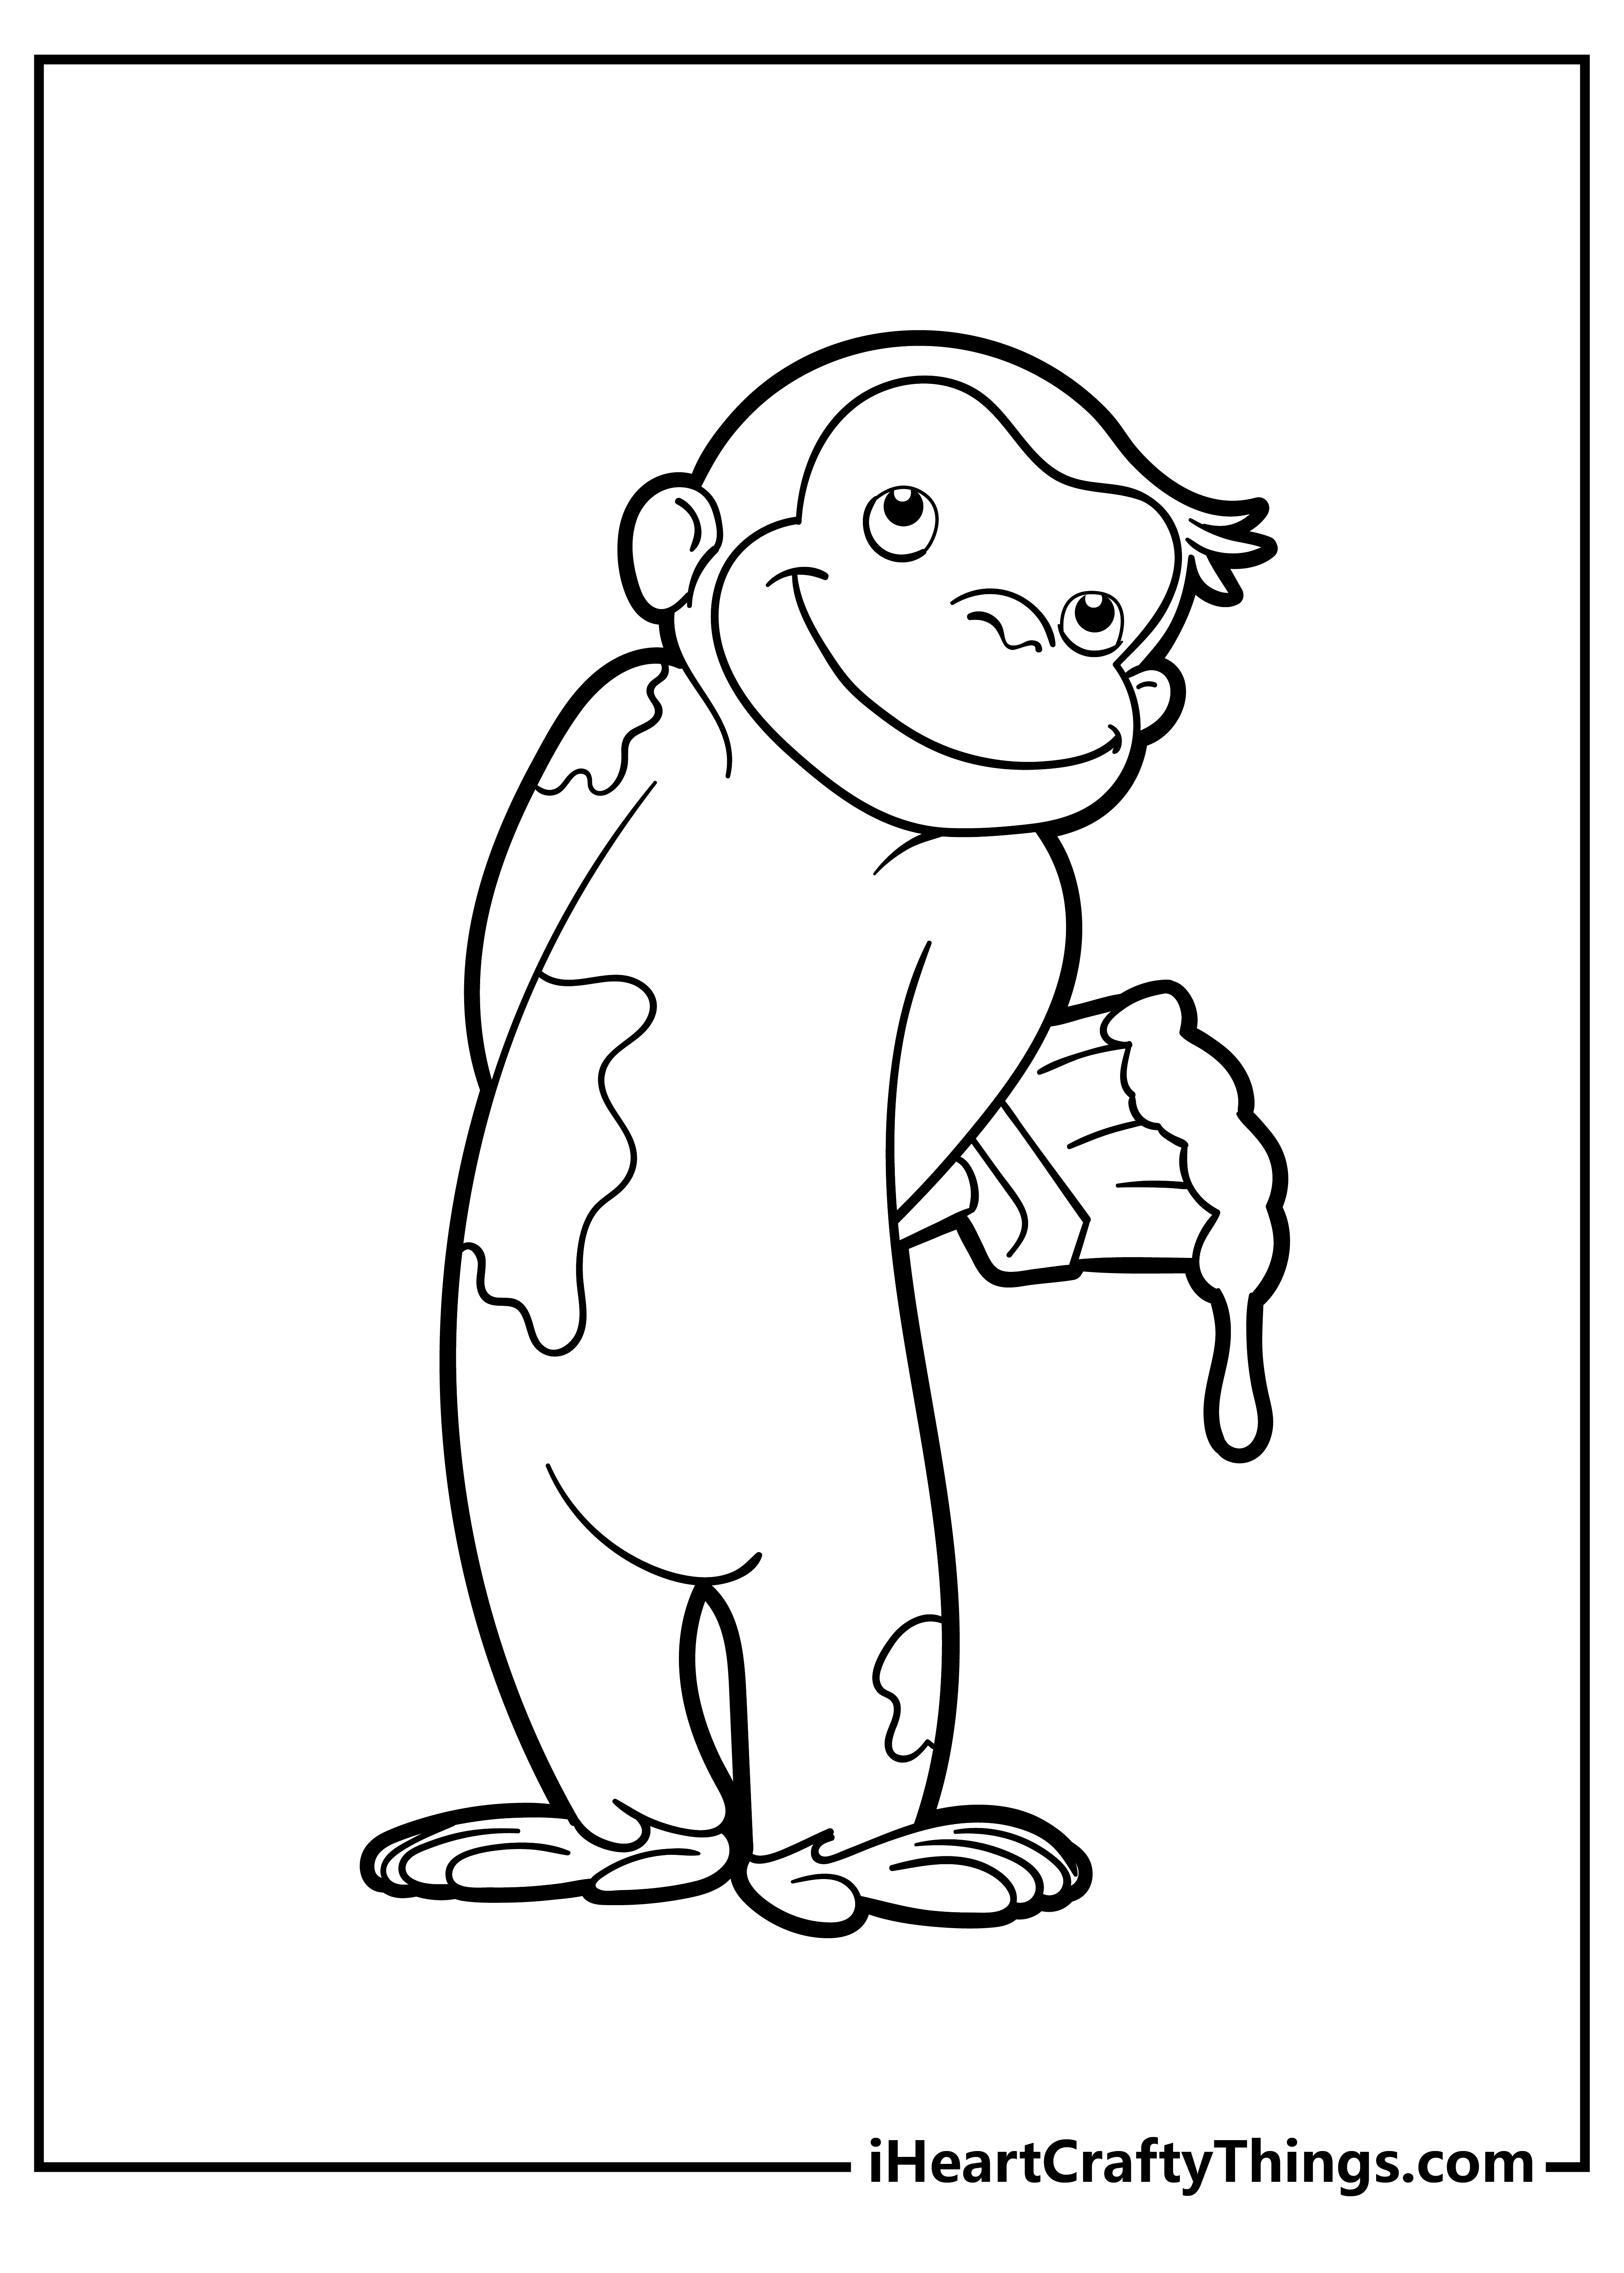 Curious George Coloring Book for adults free download